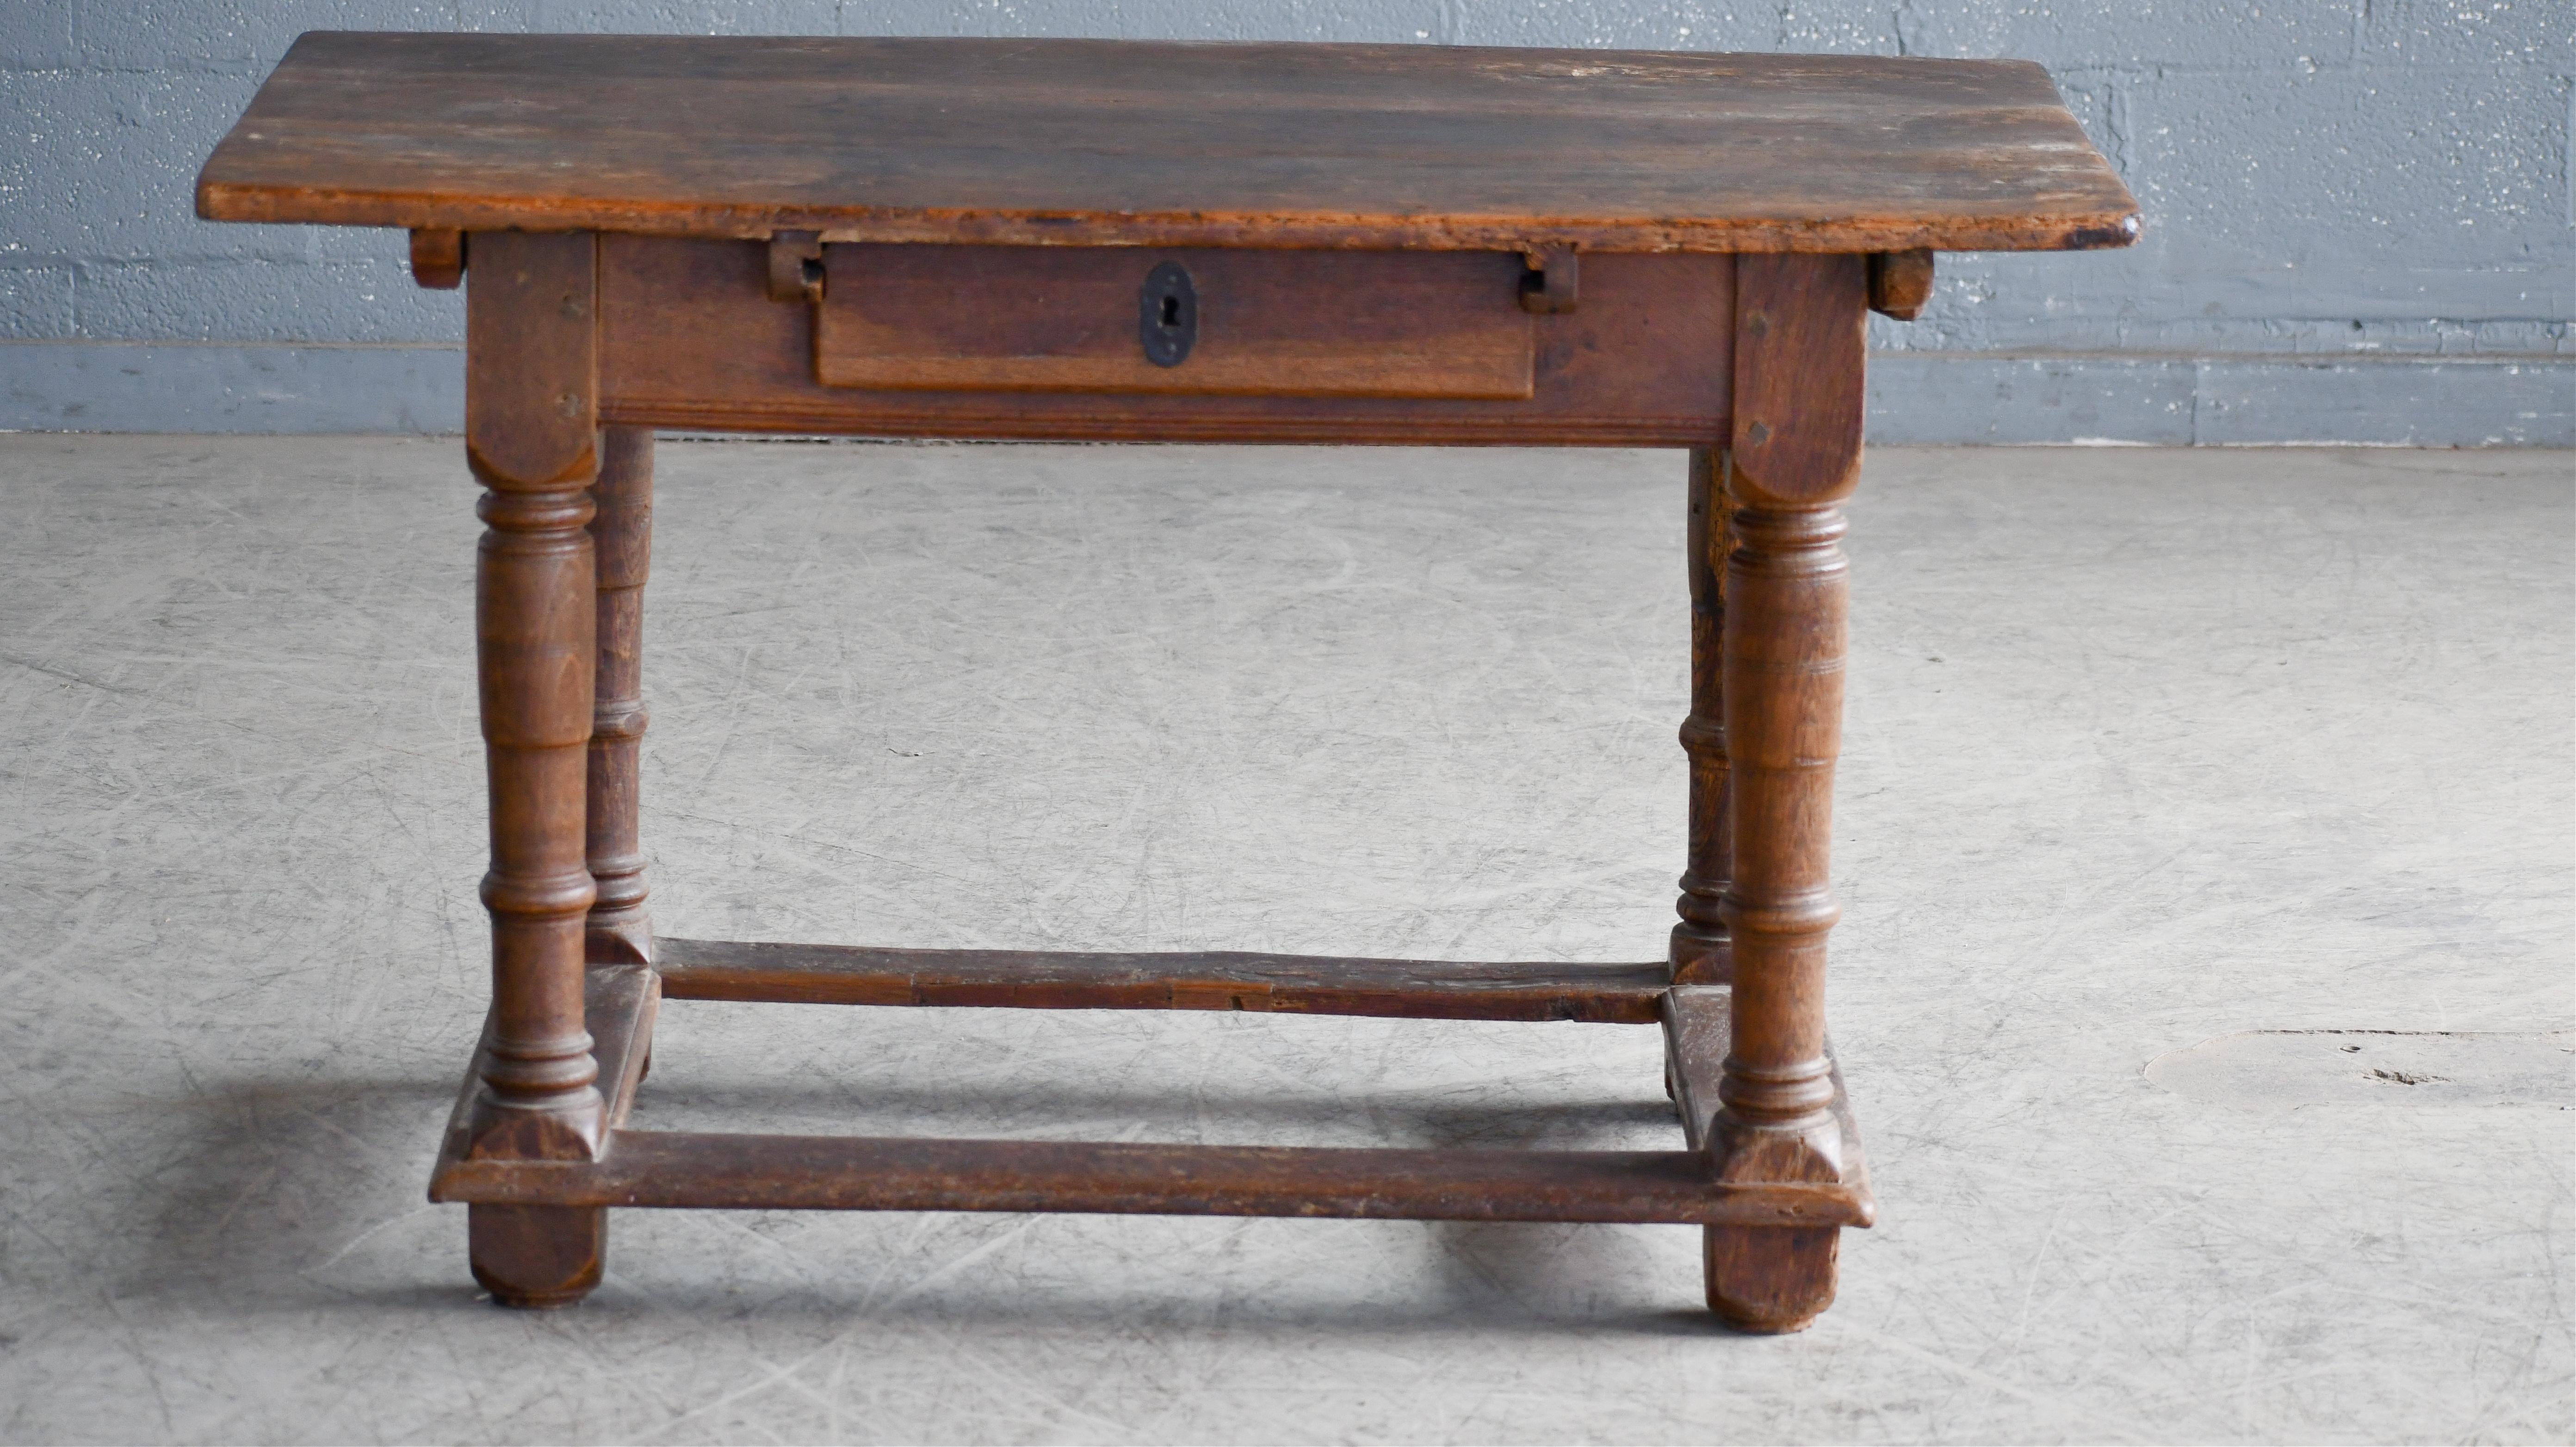 We found this charming country console table table in Denmark - entirely made of thick solid oak. Probably made around 1900 and remains sturdy and strong. The tabletop shows some sign of wear and age and probably had some kind of work purpose based